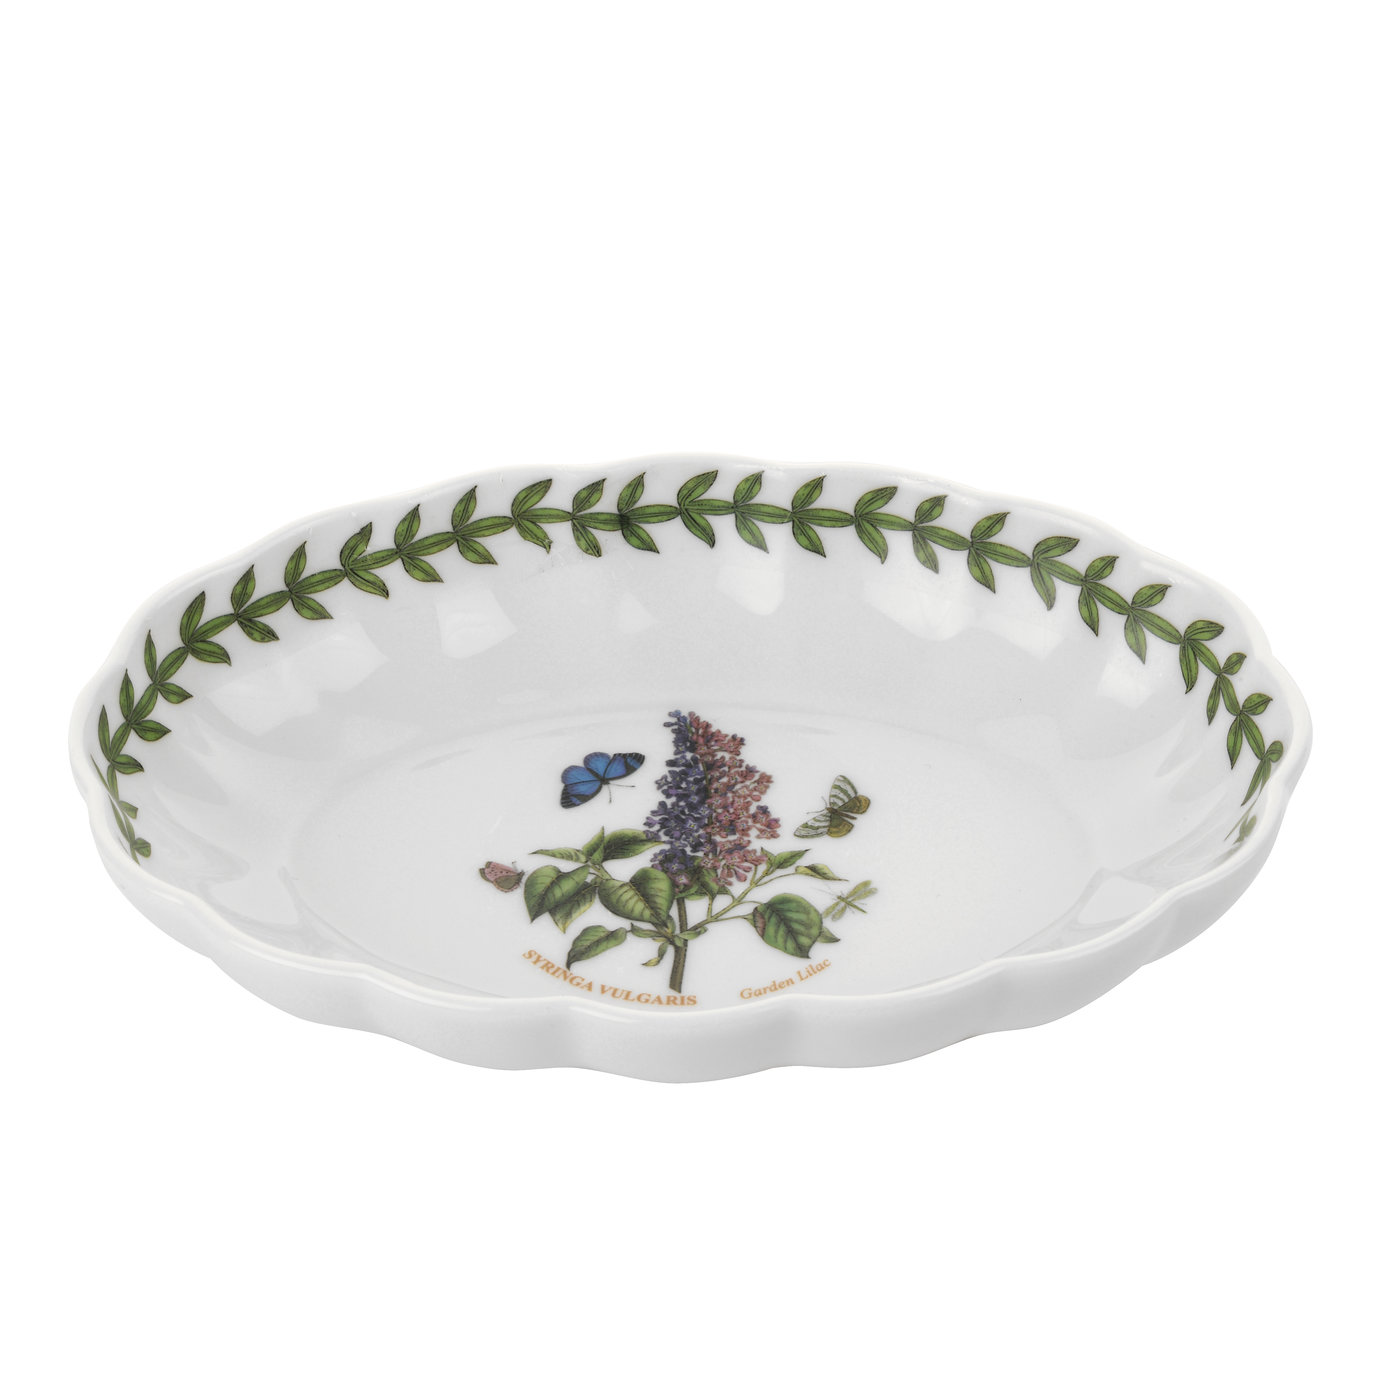 Botanic Garden 6 Inch Fluted Oval Dish, Garden Lilac image number null